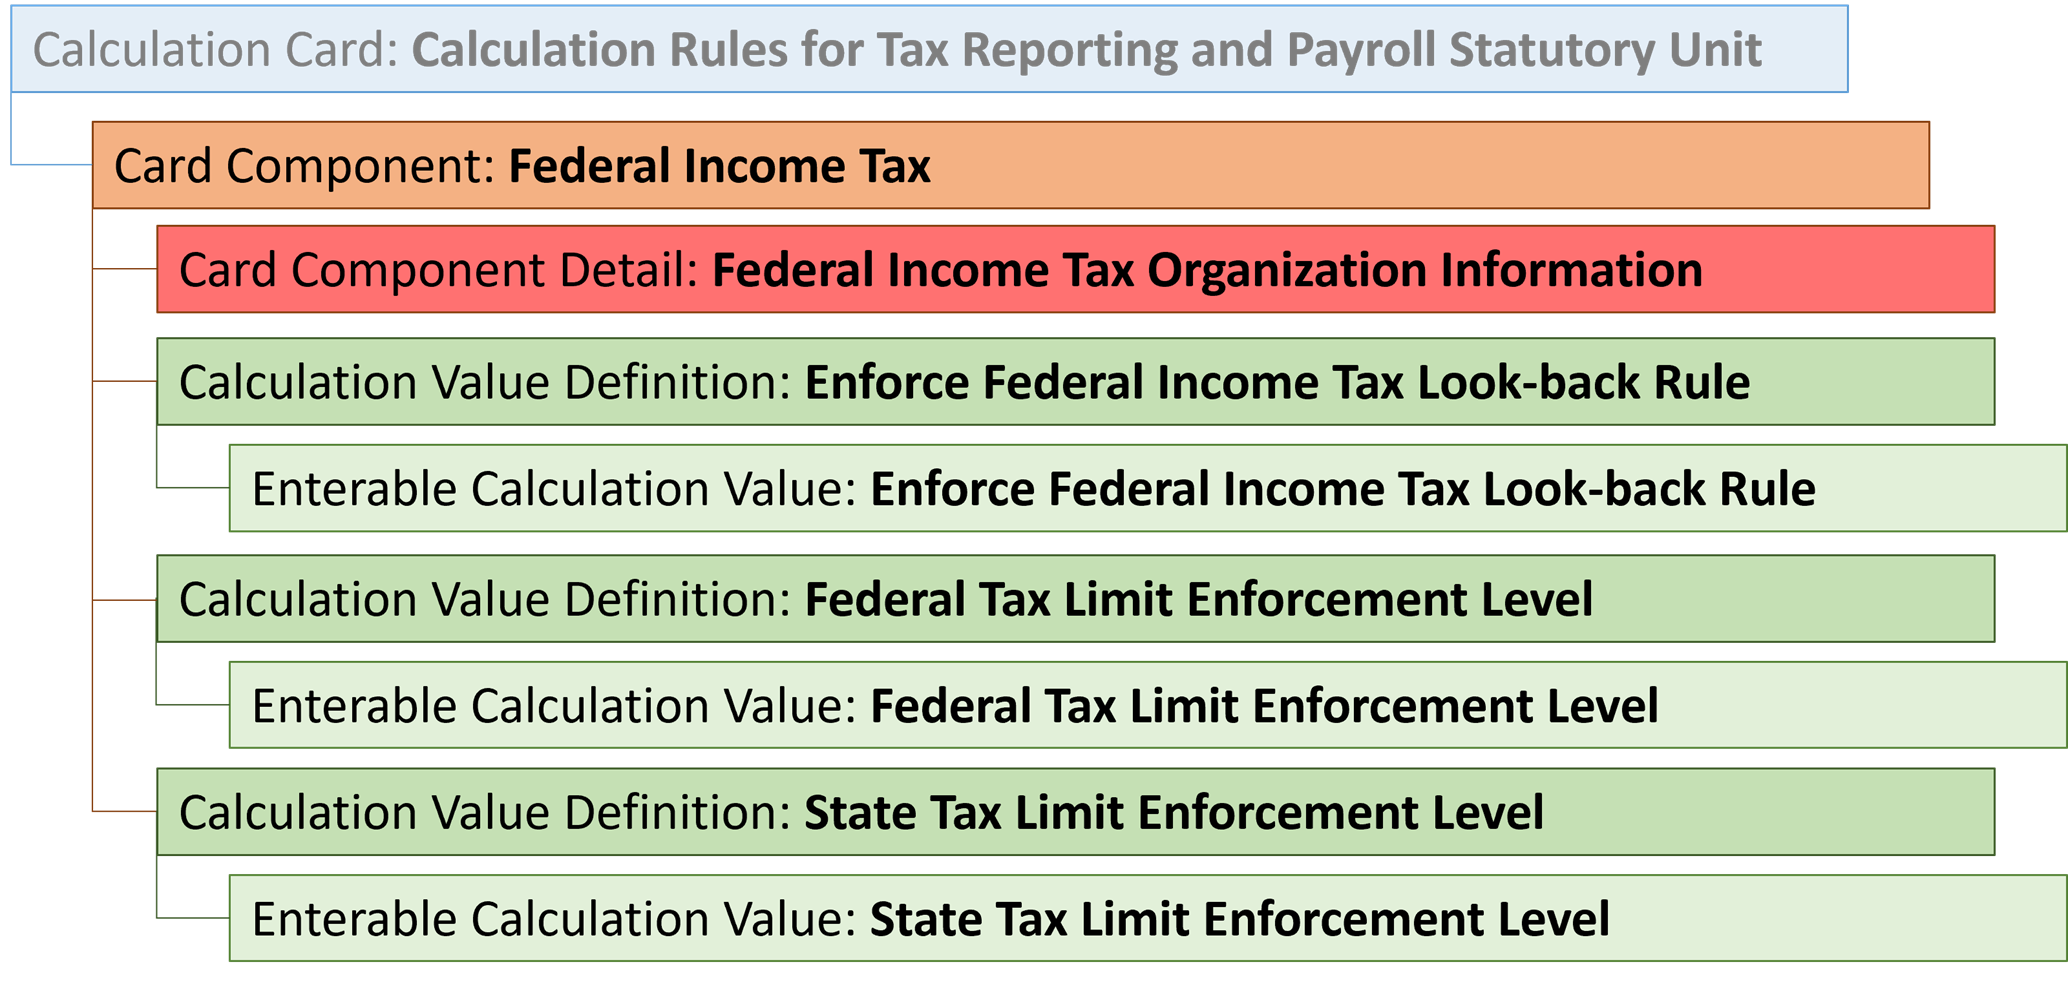 Federal Income Tax card component